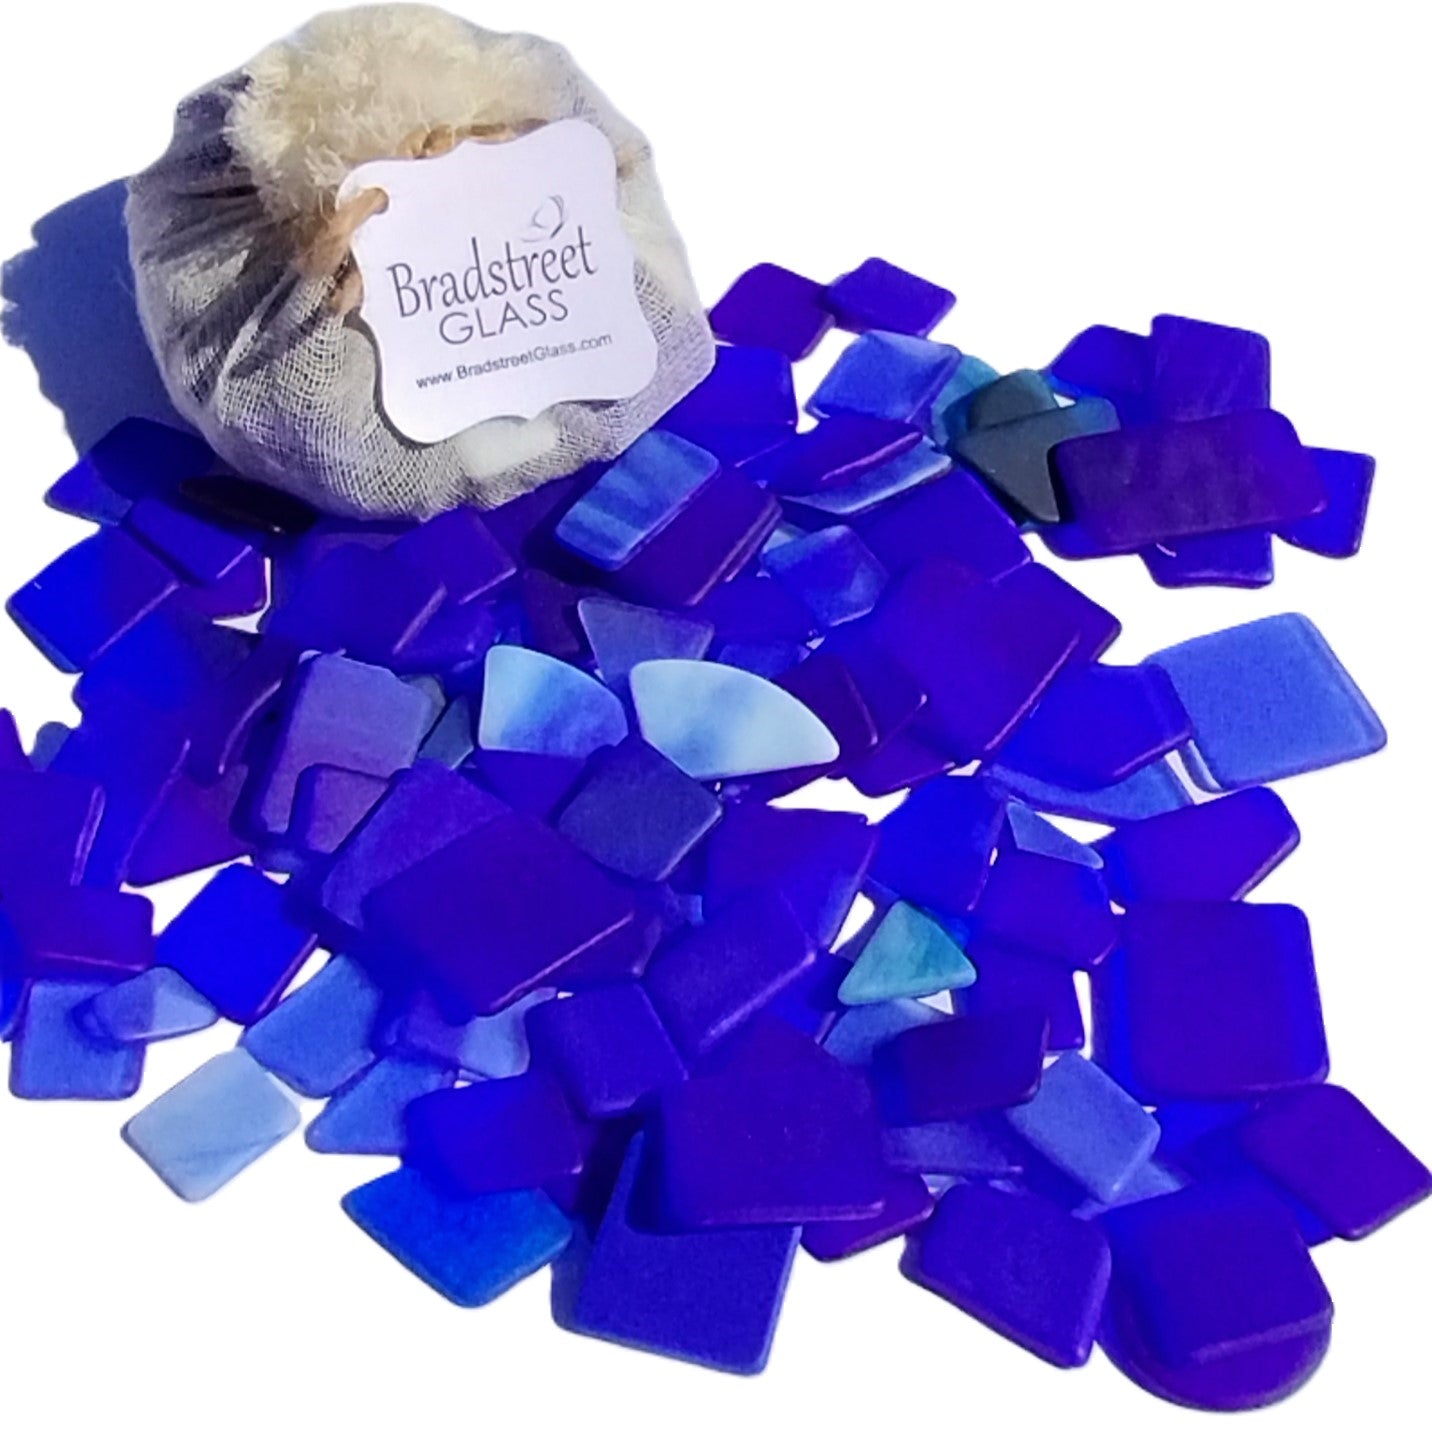 Bradstreet Glass Blue Tumbled Stained Glass 1/2 pound "Sea Glass" in Shades of Blue